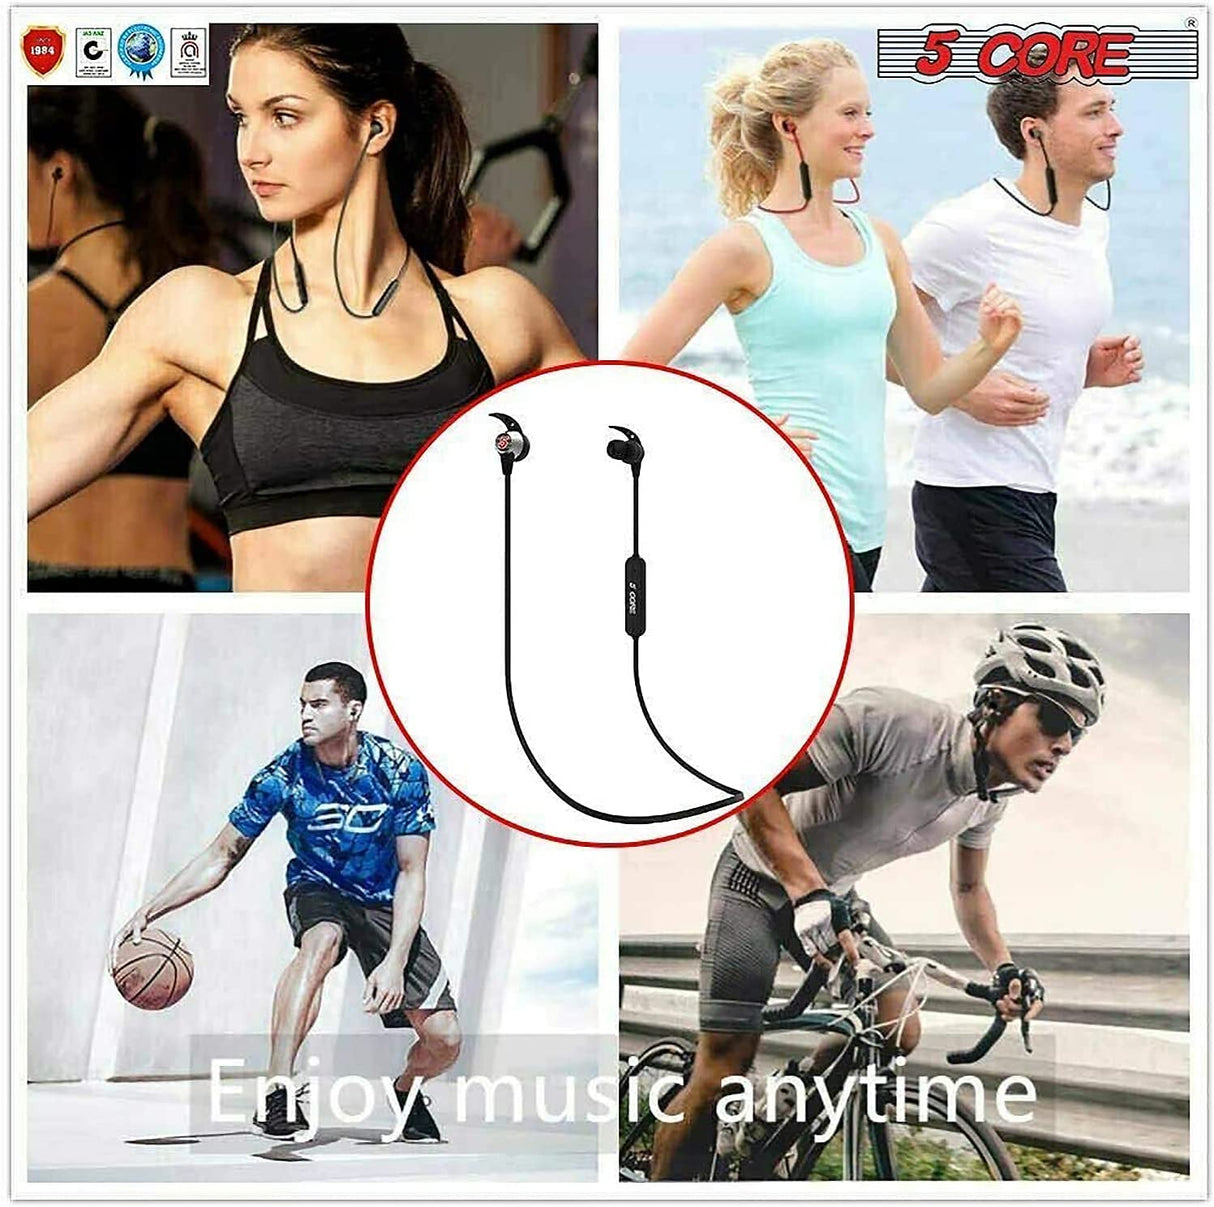 5 Core Bluetooth Headphone Black | Wireless Sports Earbuds with Mic| IPX7 Waterproof Neckband Bluetooth headphone| Noise Cancelling Headsets for Gym, Running, Workout, 10 Hours Playtime - EP02 S